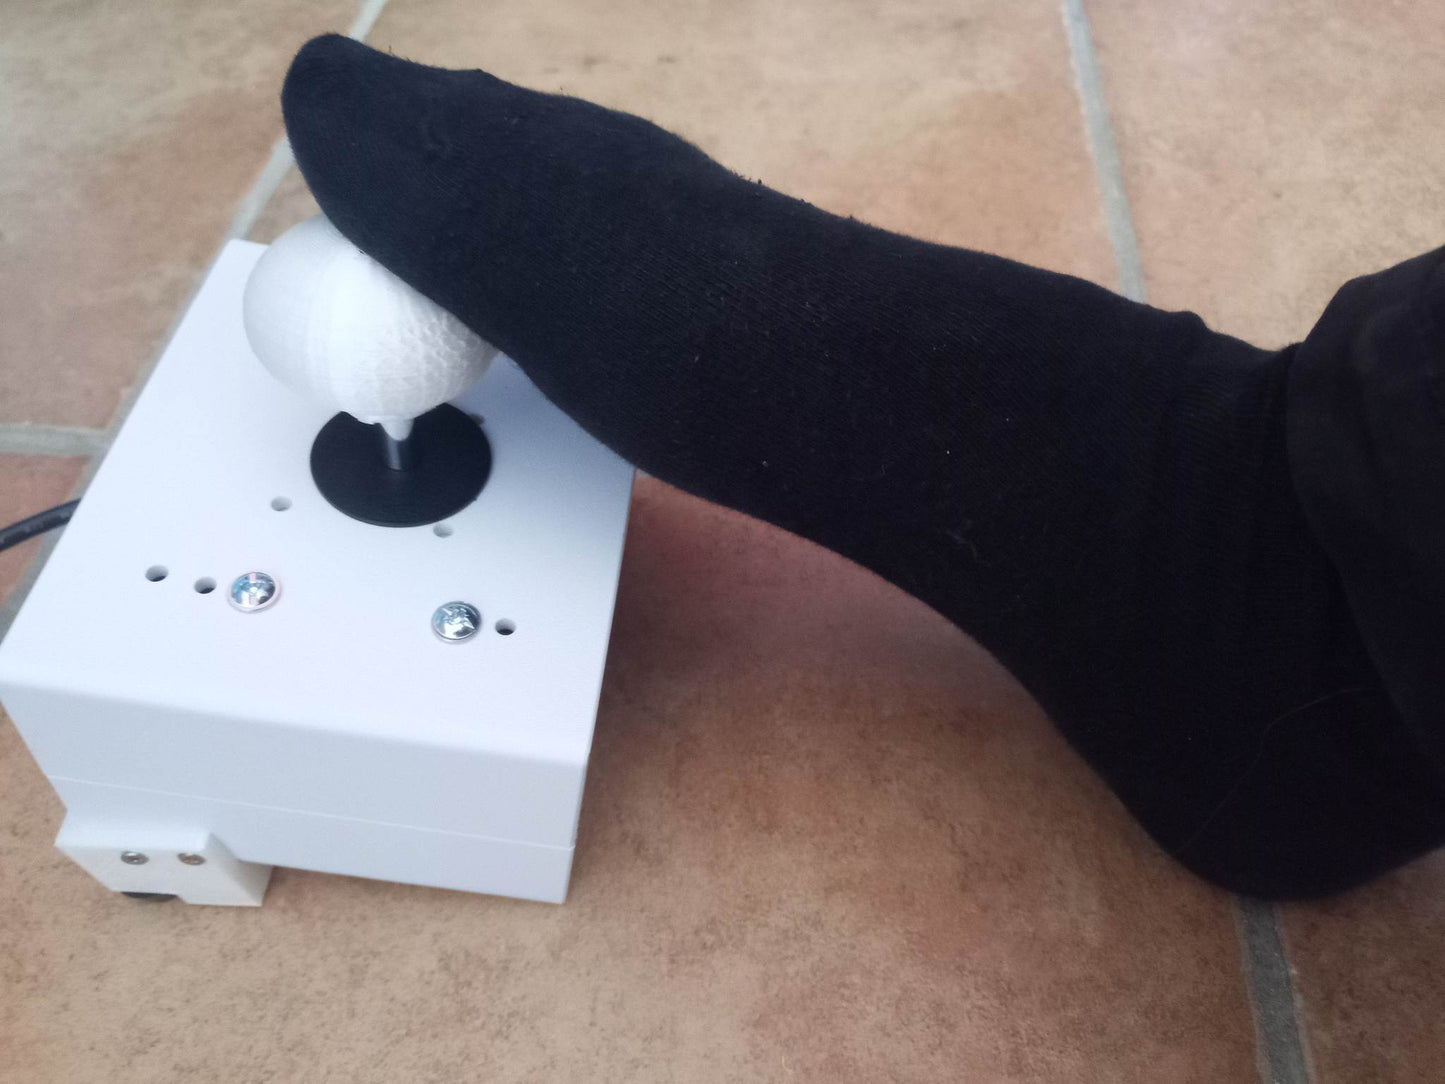 USB analog joystick - for the foot